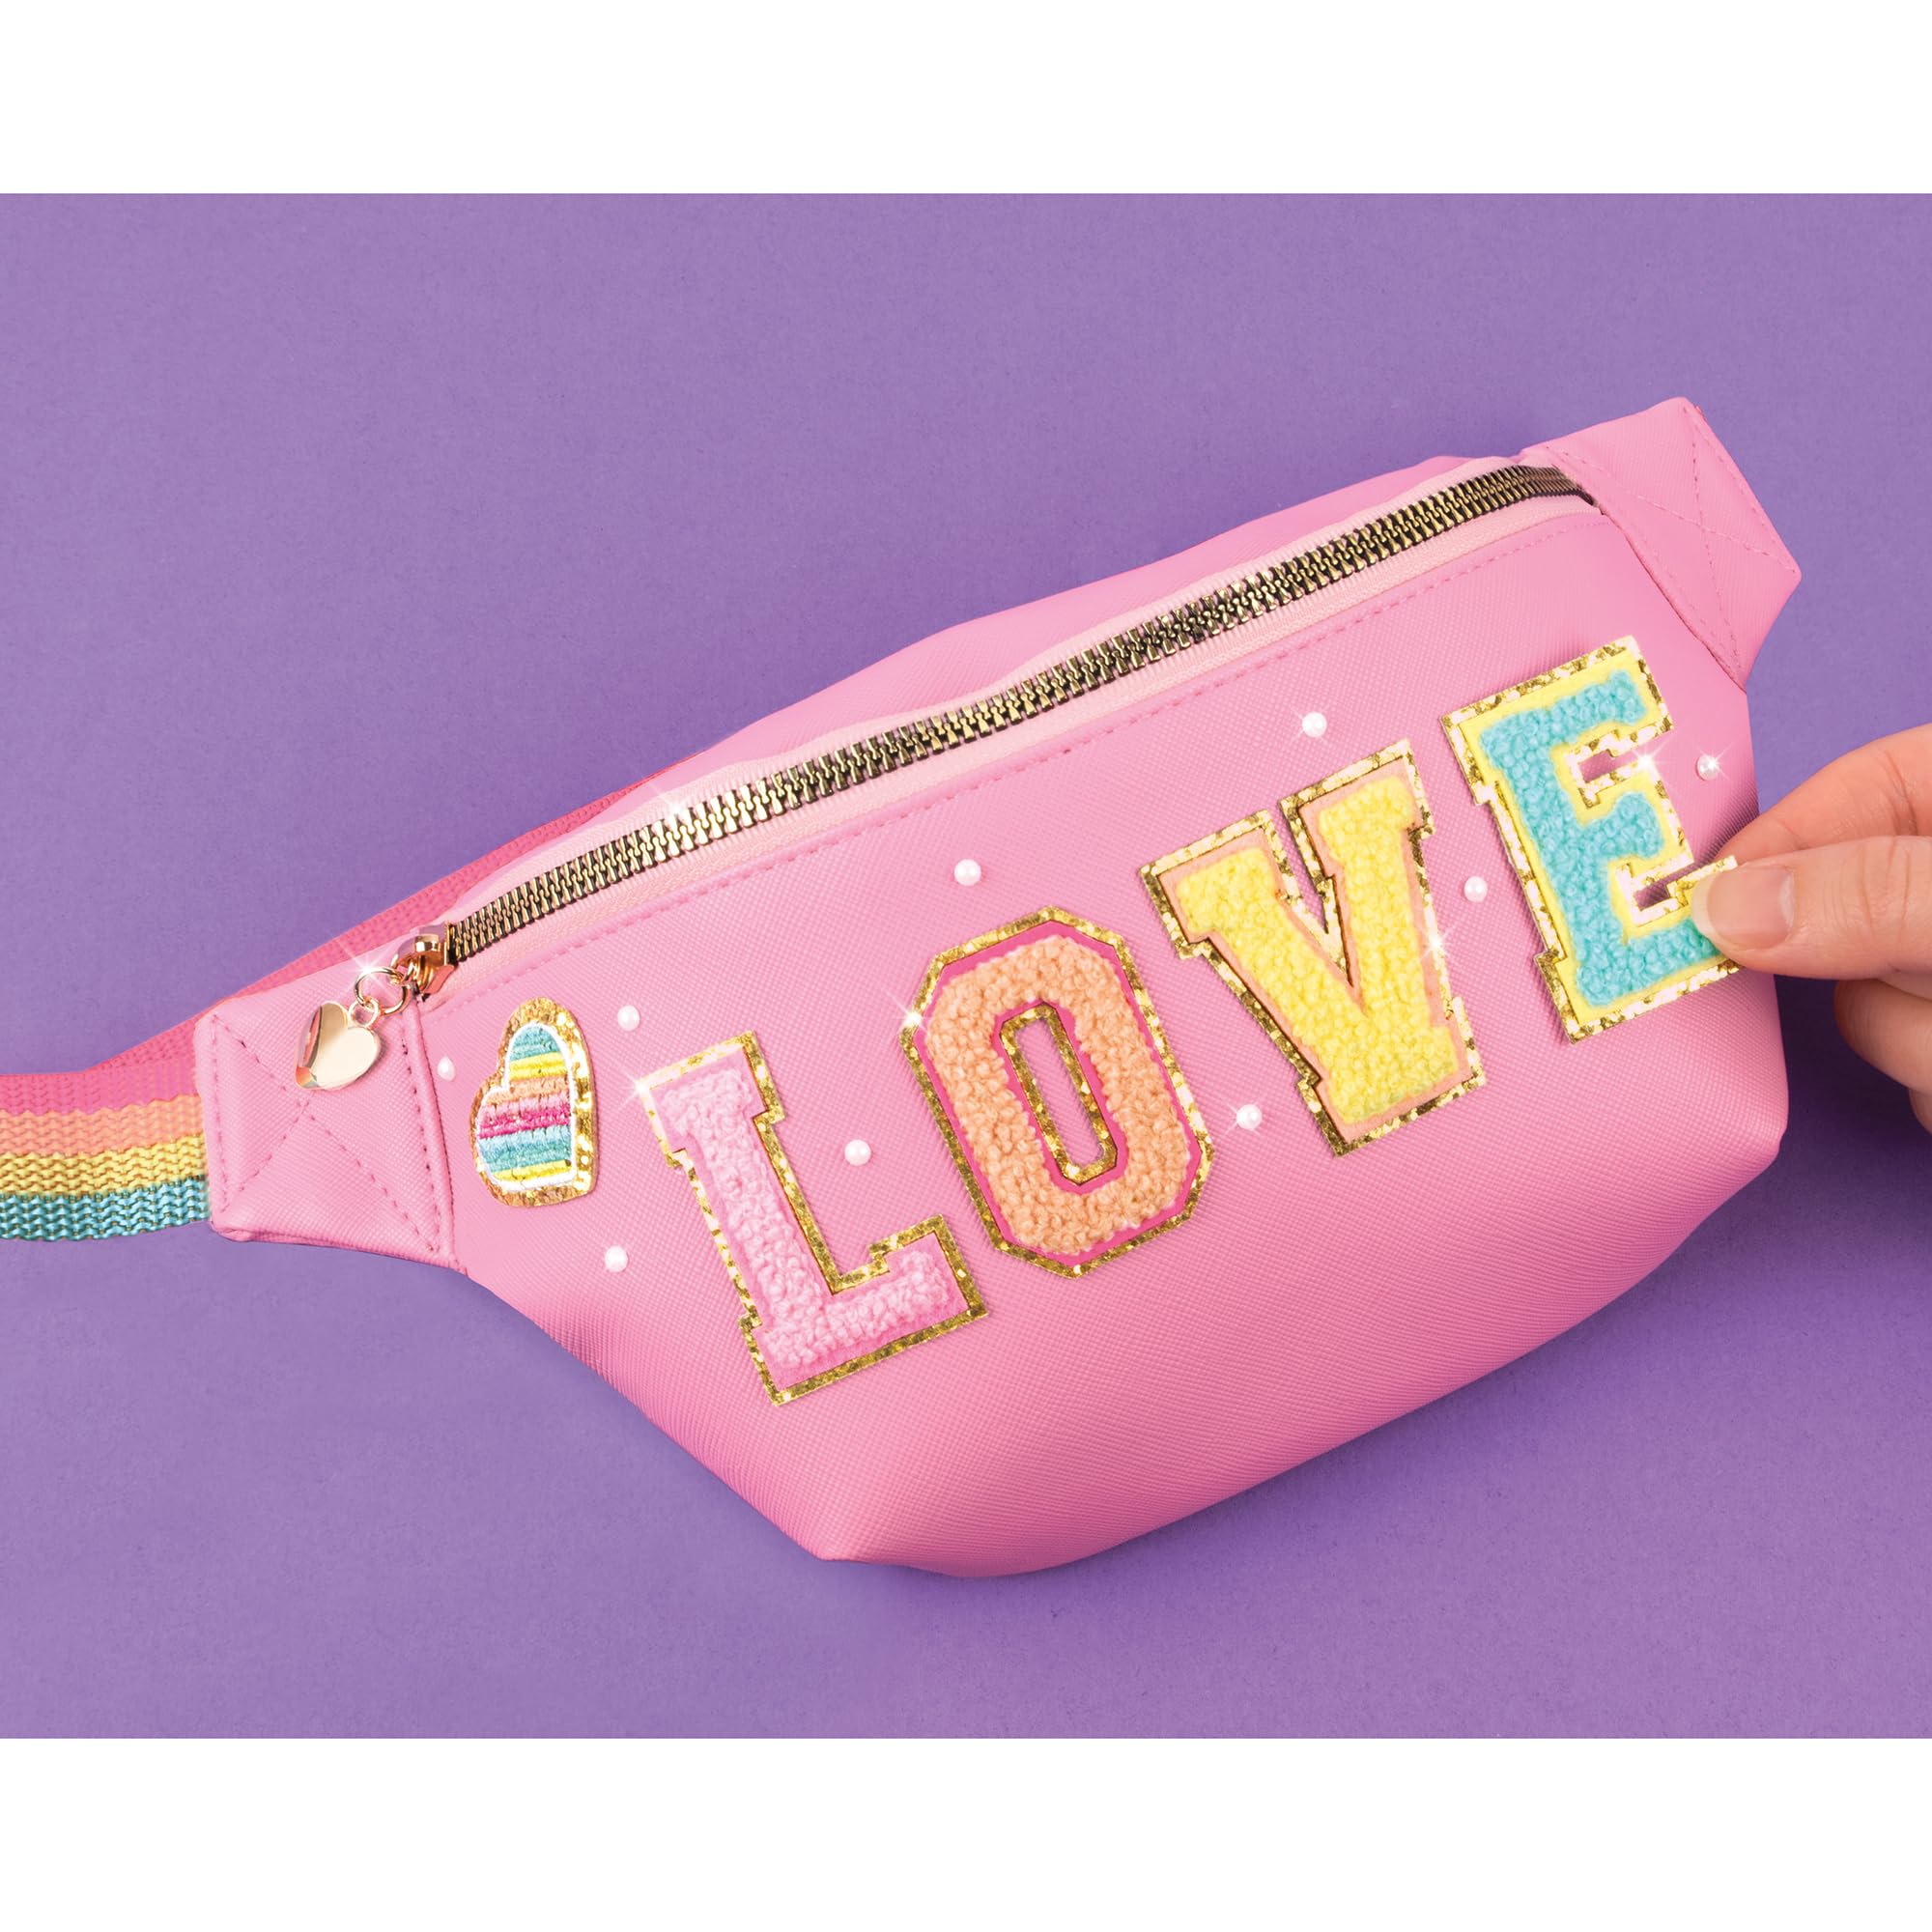 Make It Real: Fashion Bum Bag with Patches - 9 pcs, Pink Zipper Bag with Rainbow Band, DIY Customize, Love Patches, Tweens, Girls & Kids Ages 8+